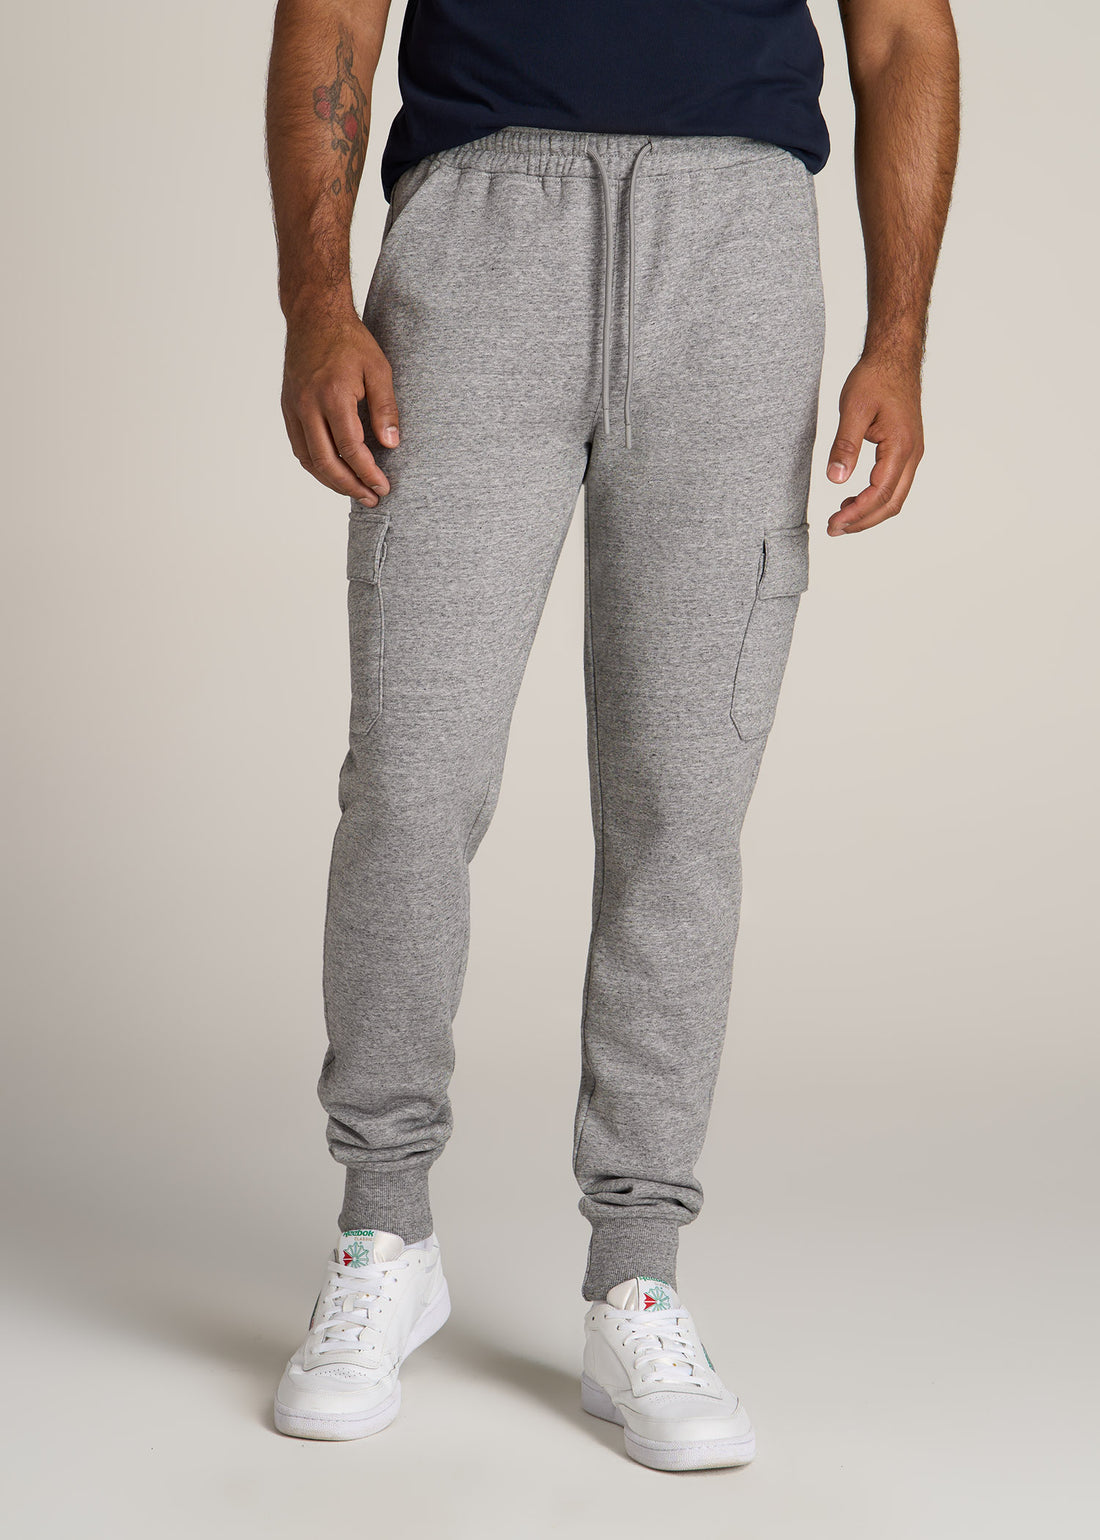 9 Stylish Ways to Wear Men's Sweatpants - Fashionably Male  Mens joggers  outfit, Pants outfit men, Jogger pants outfit